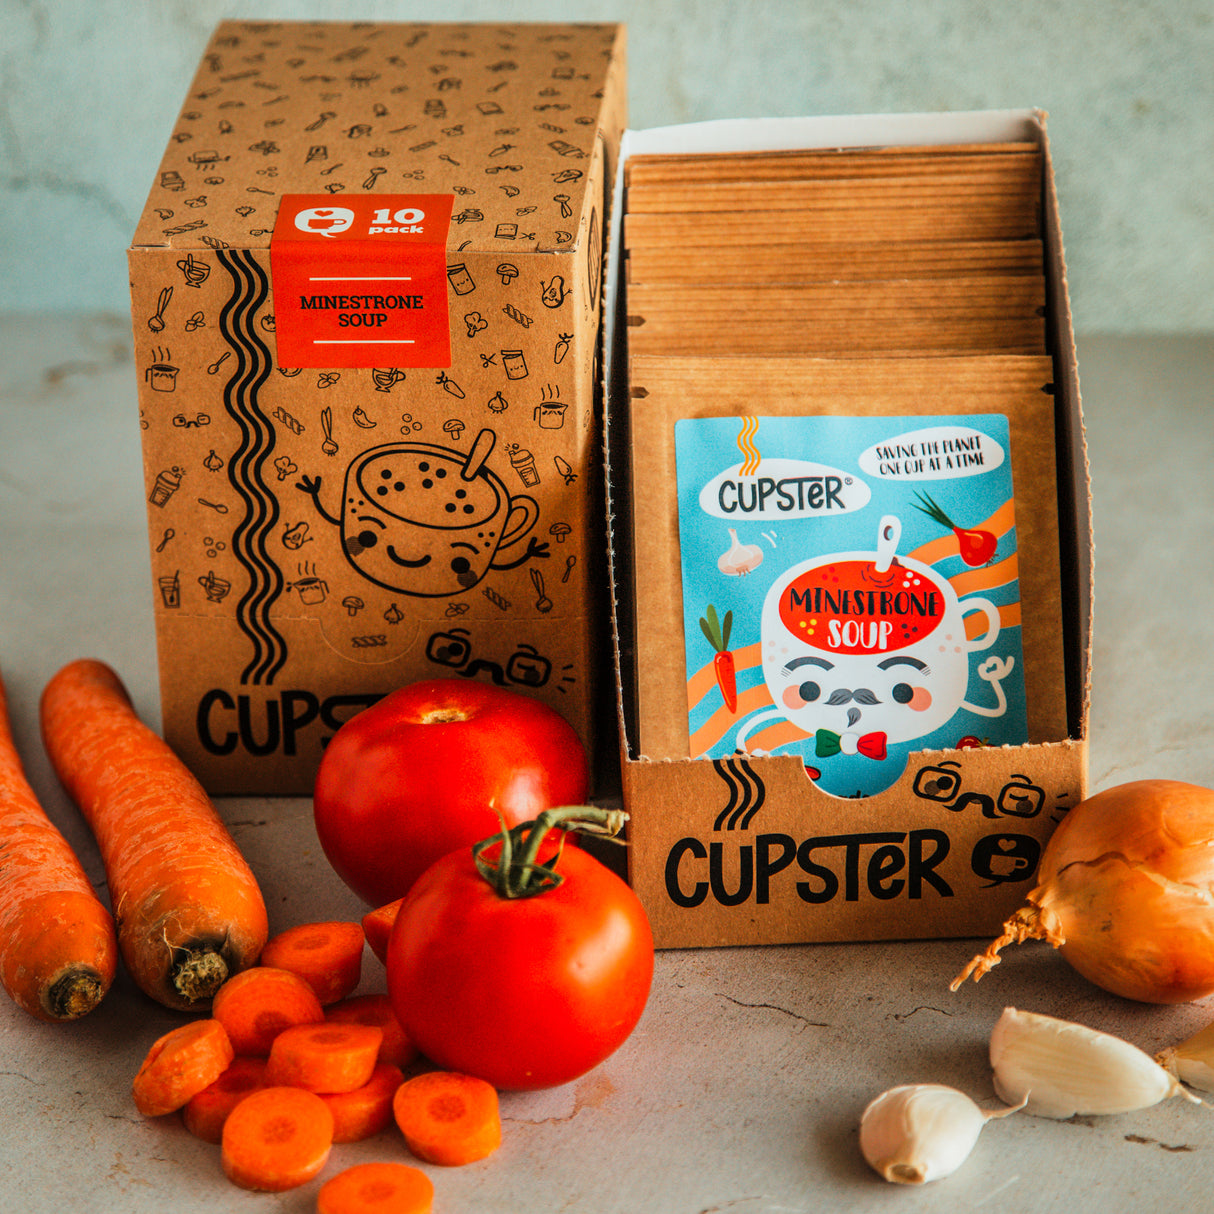 Cupster instant minestronesoep 22g